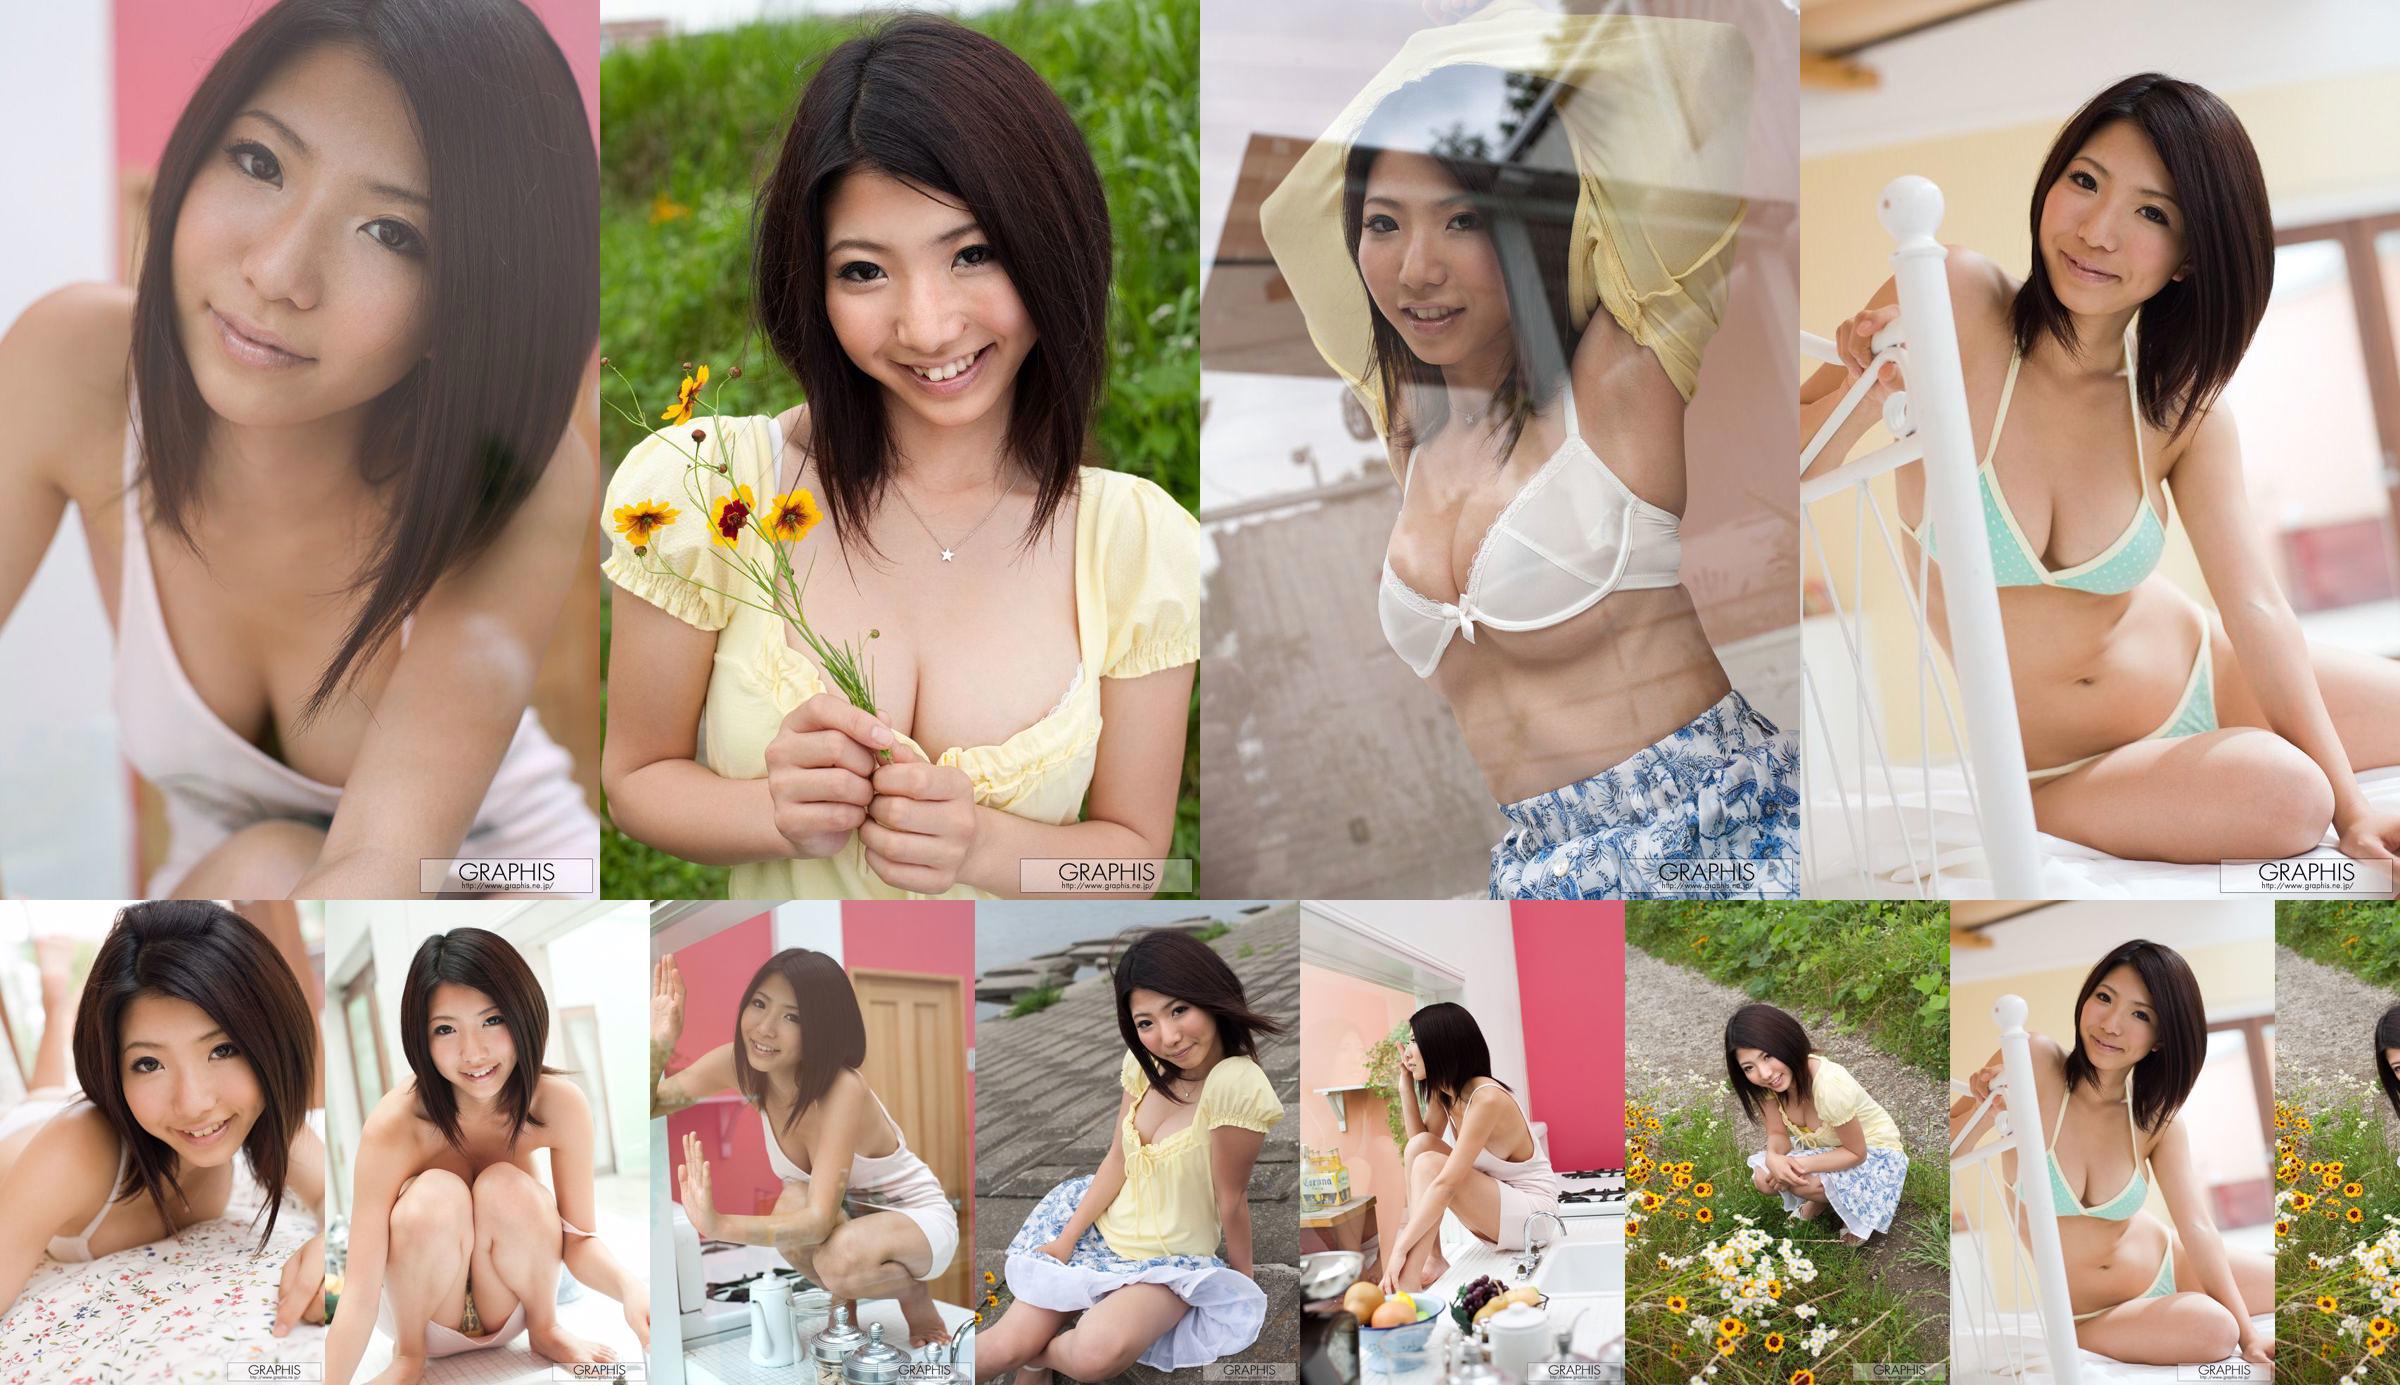 An Ann Simple and Innocent [Graphis] Gals No.9694bc Pagina 1